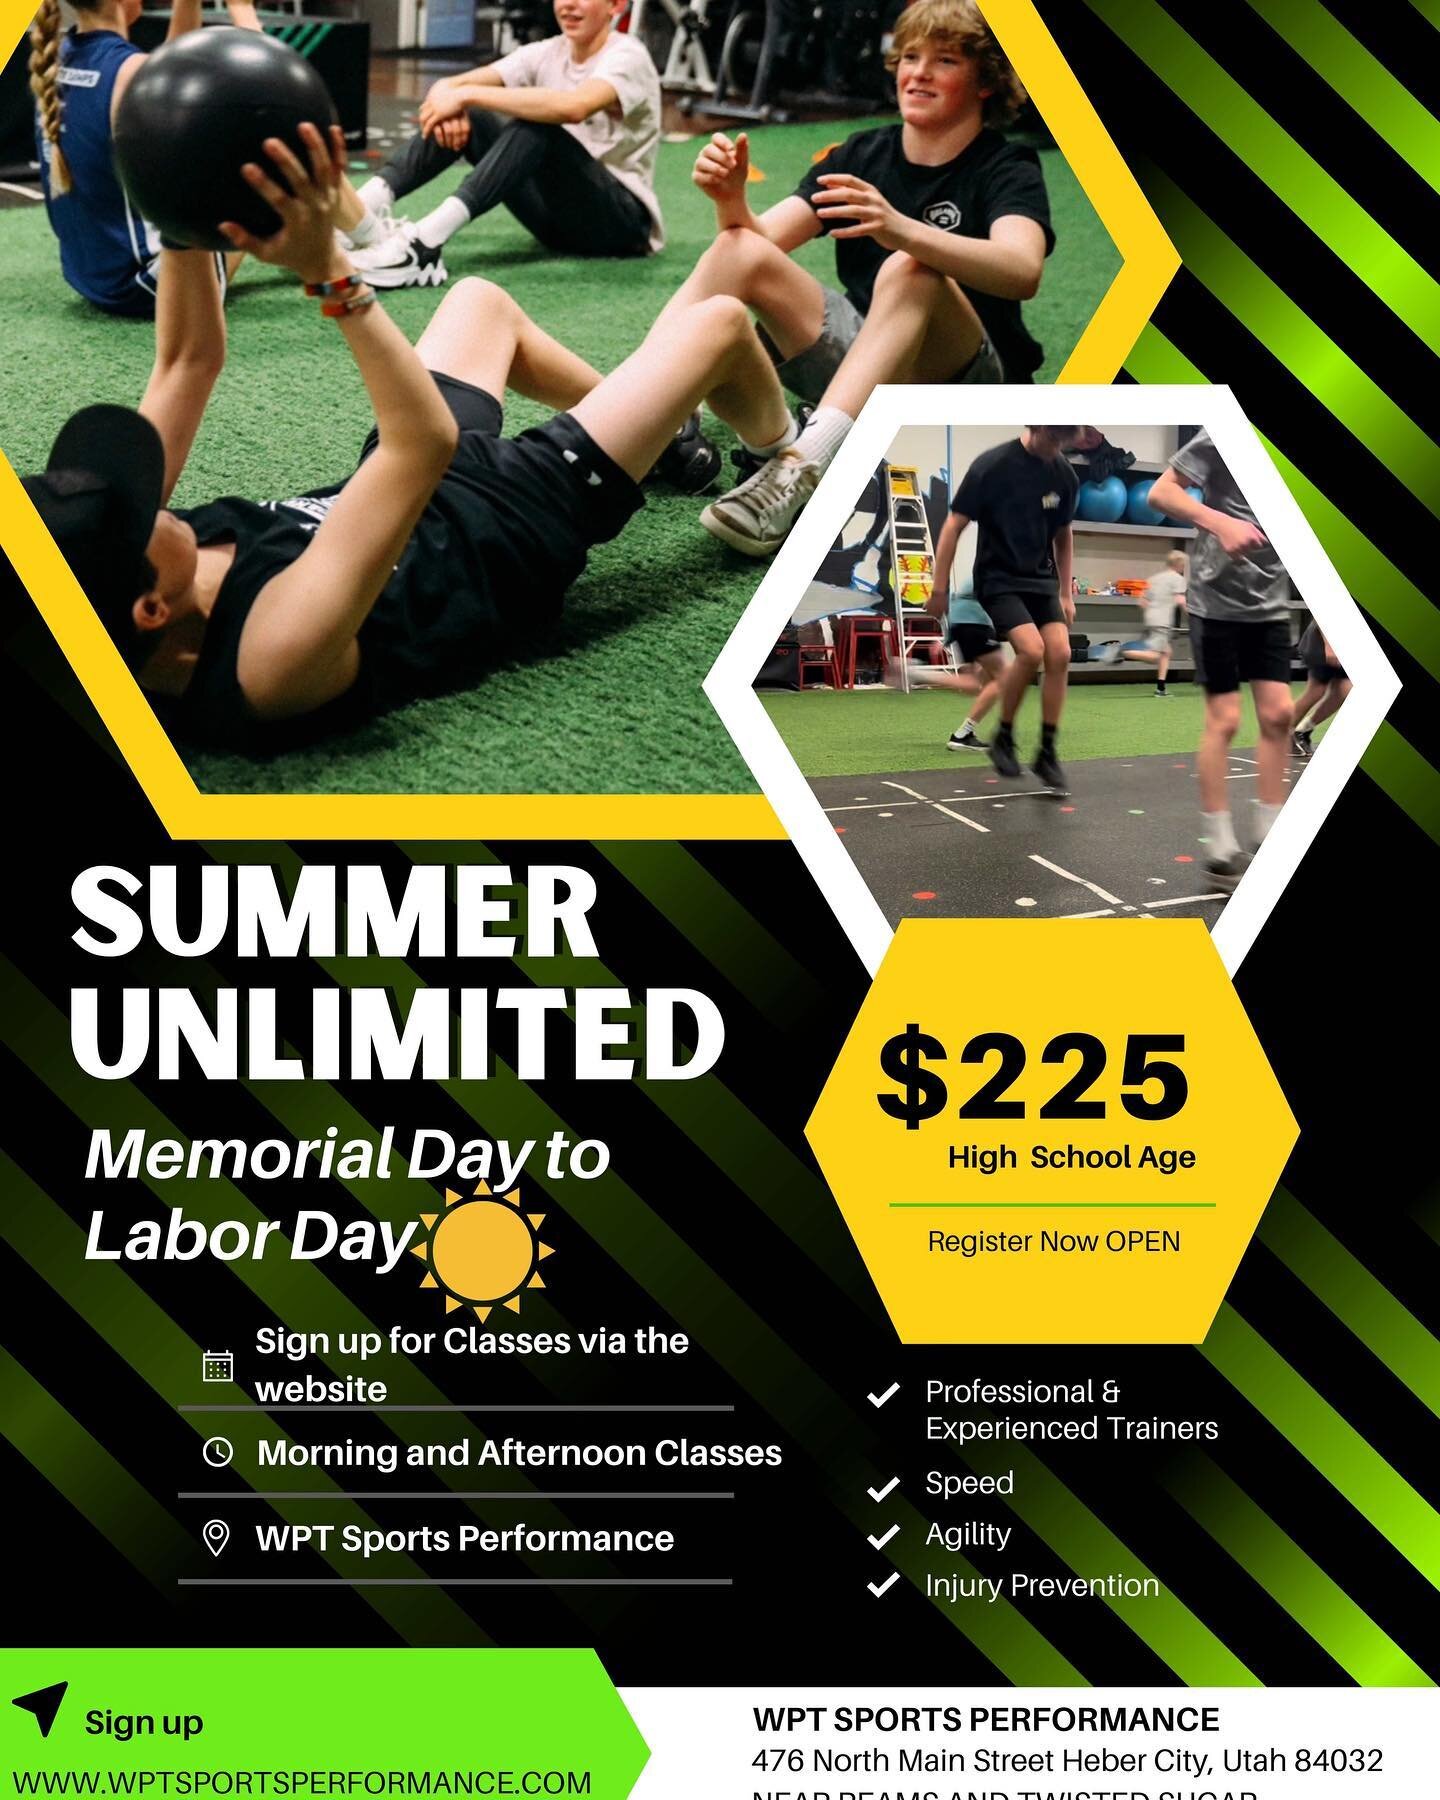 Attention high school students! Get ready to level up your fitness game this summer with our unlimited pass! For just $229, you'll have access to our exclusive personal training speed and agility classes. Improve your strength, endurance, and overall